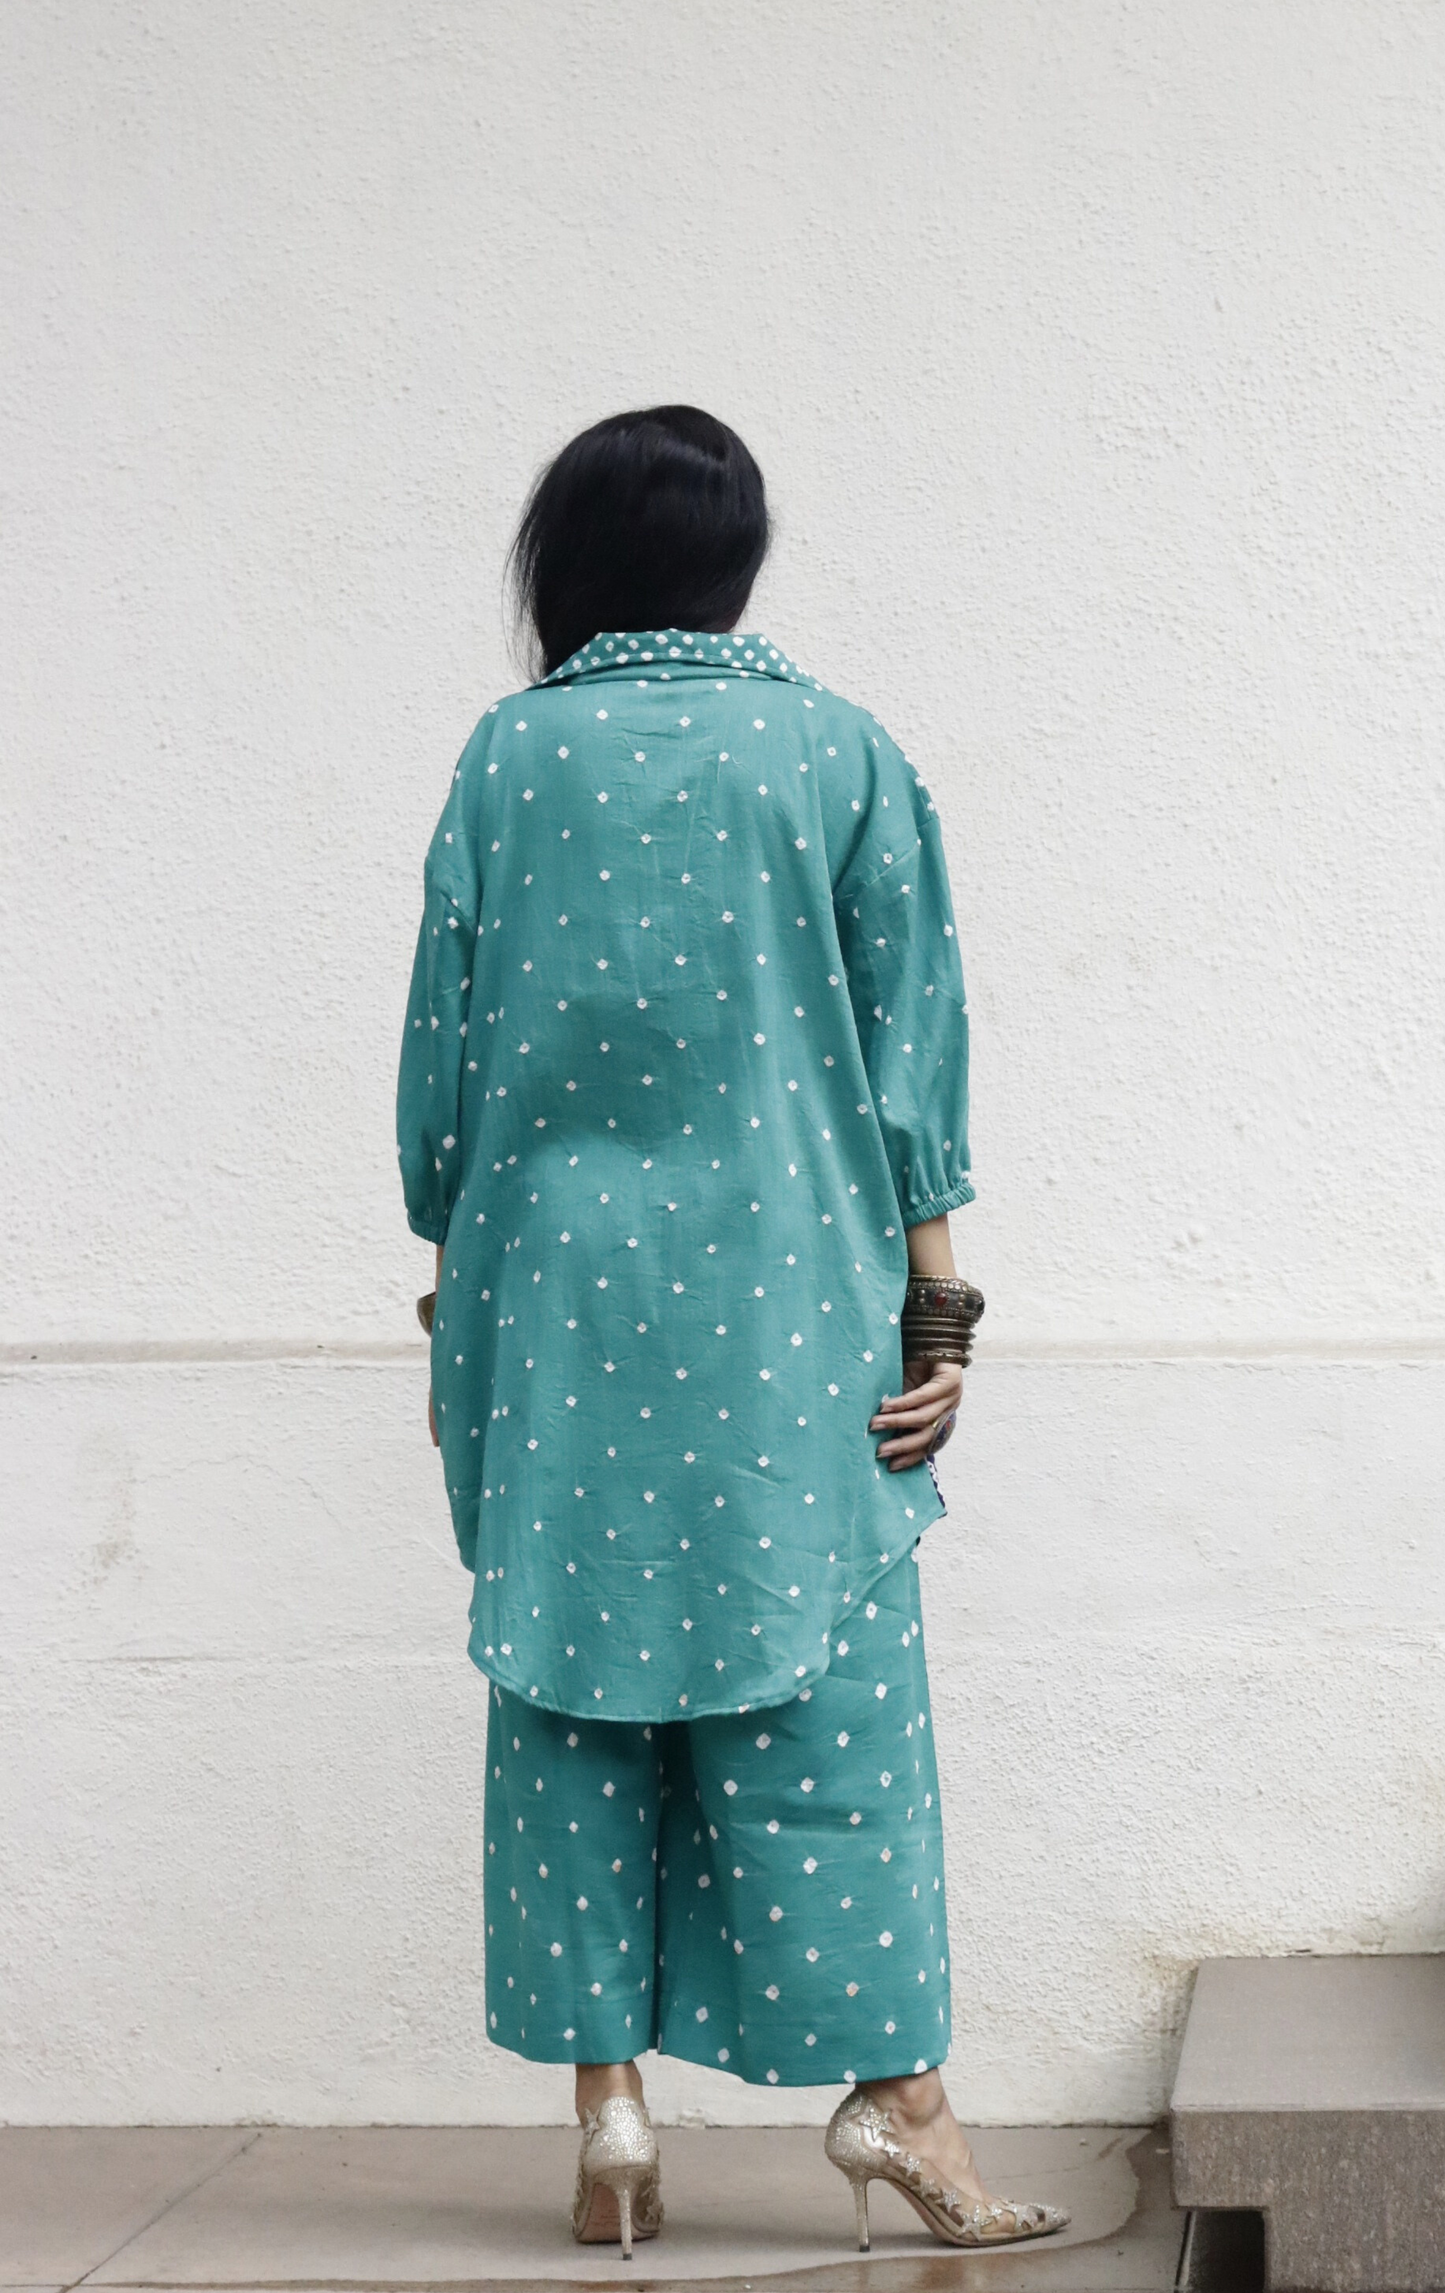 Bandhani 'Ocean' Cotton Co-ord Set In Blue Green Ombre: Buy Kurta Palazzo Cotton Co-ord Set